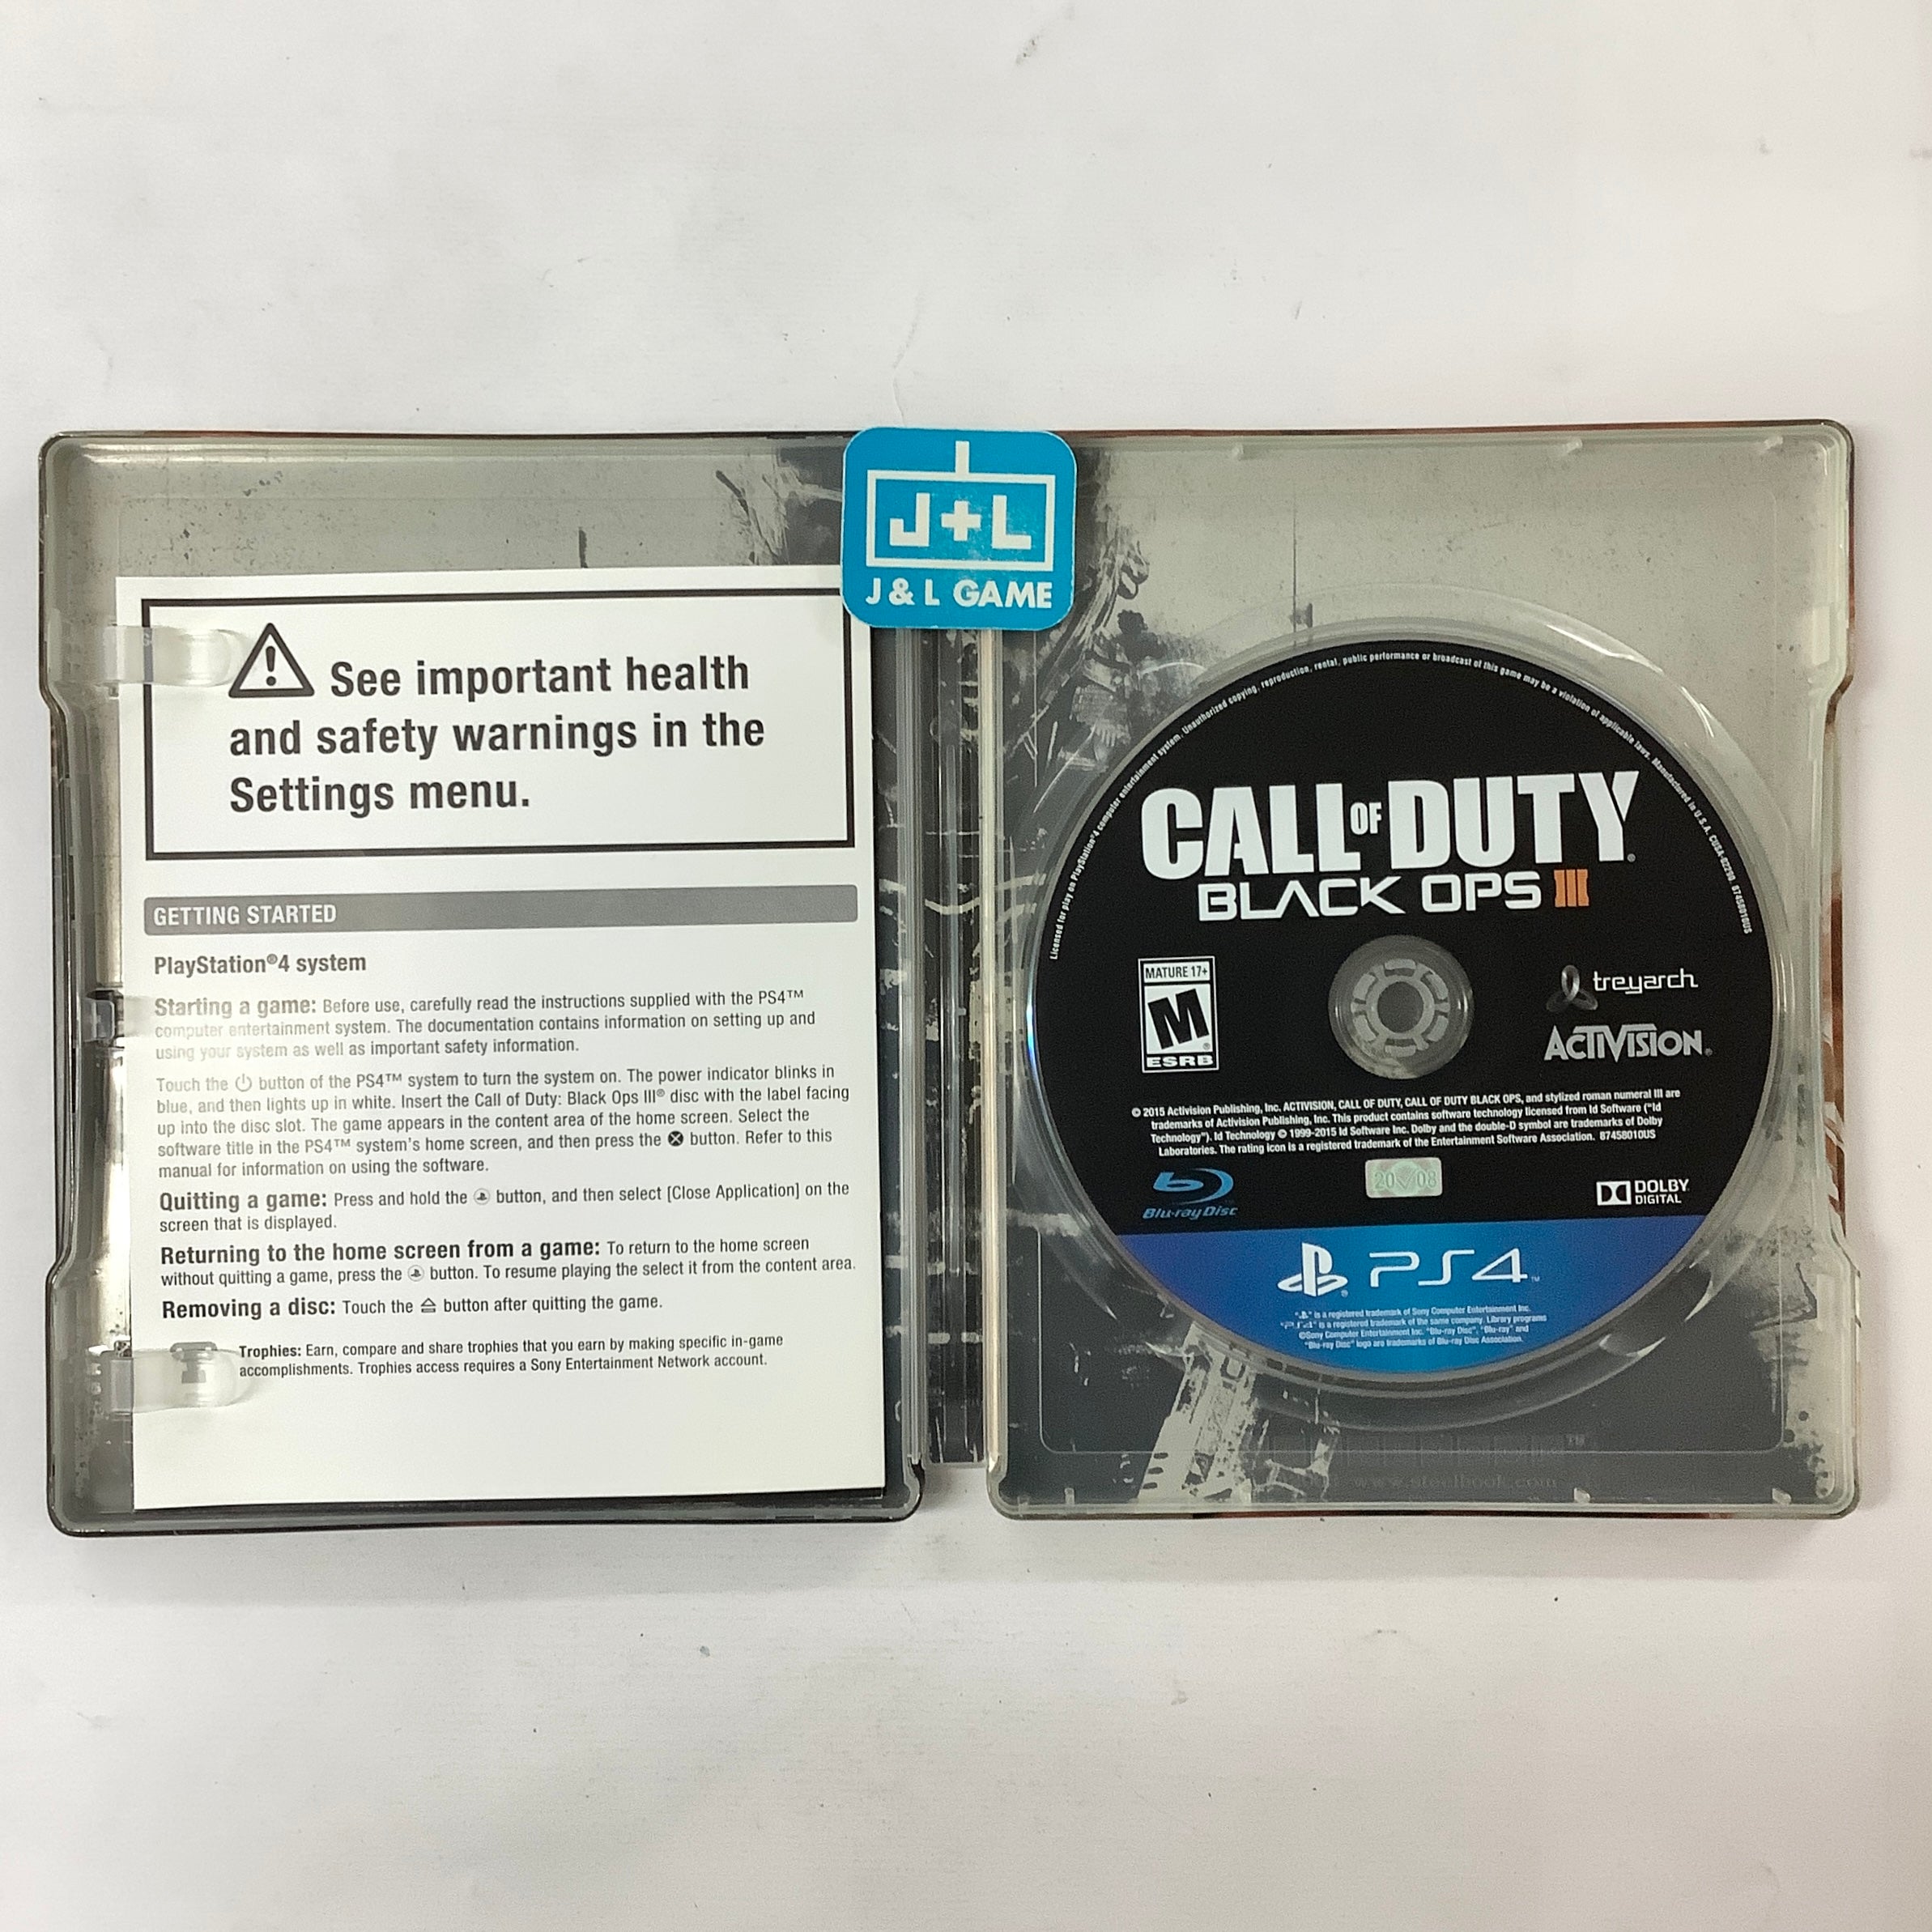 Call of Duty: Black Ops III (Hardened Edition) - (PS4) PlayStation 4 [Pre-Owned] Video Games Activision   